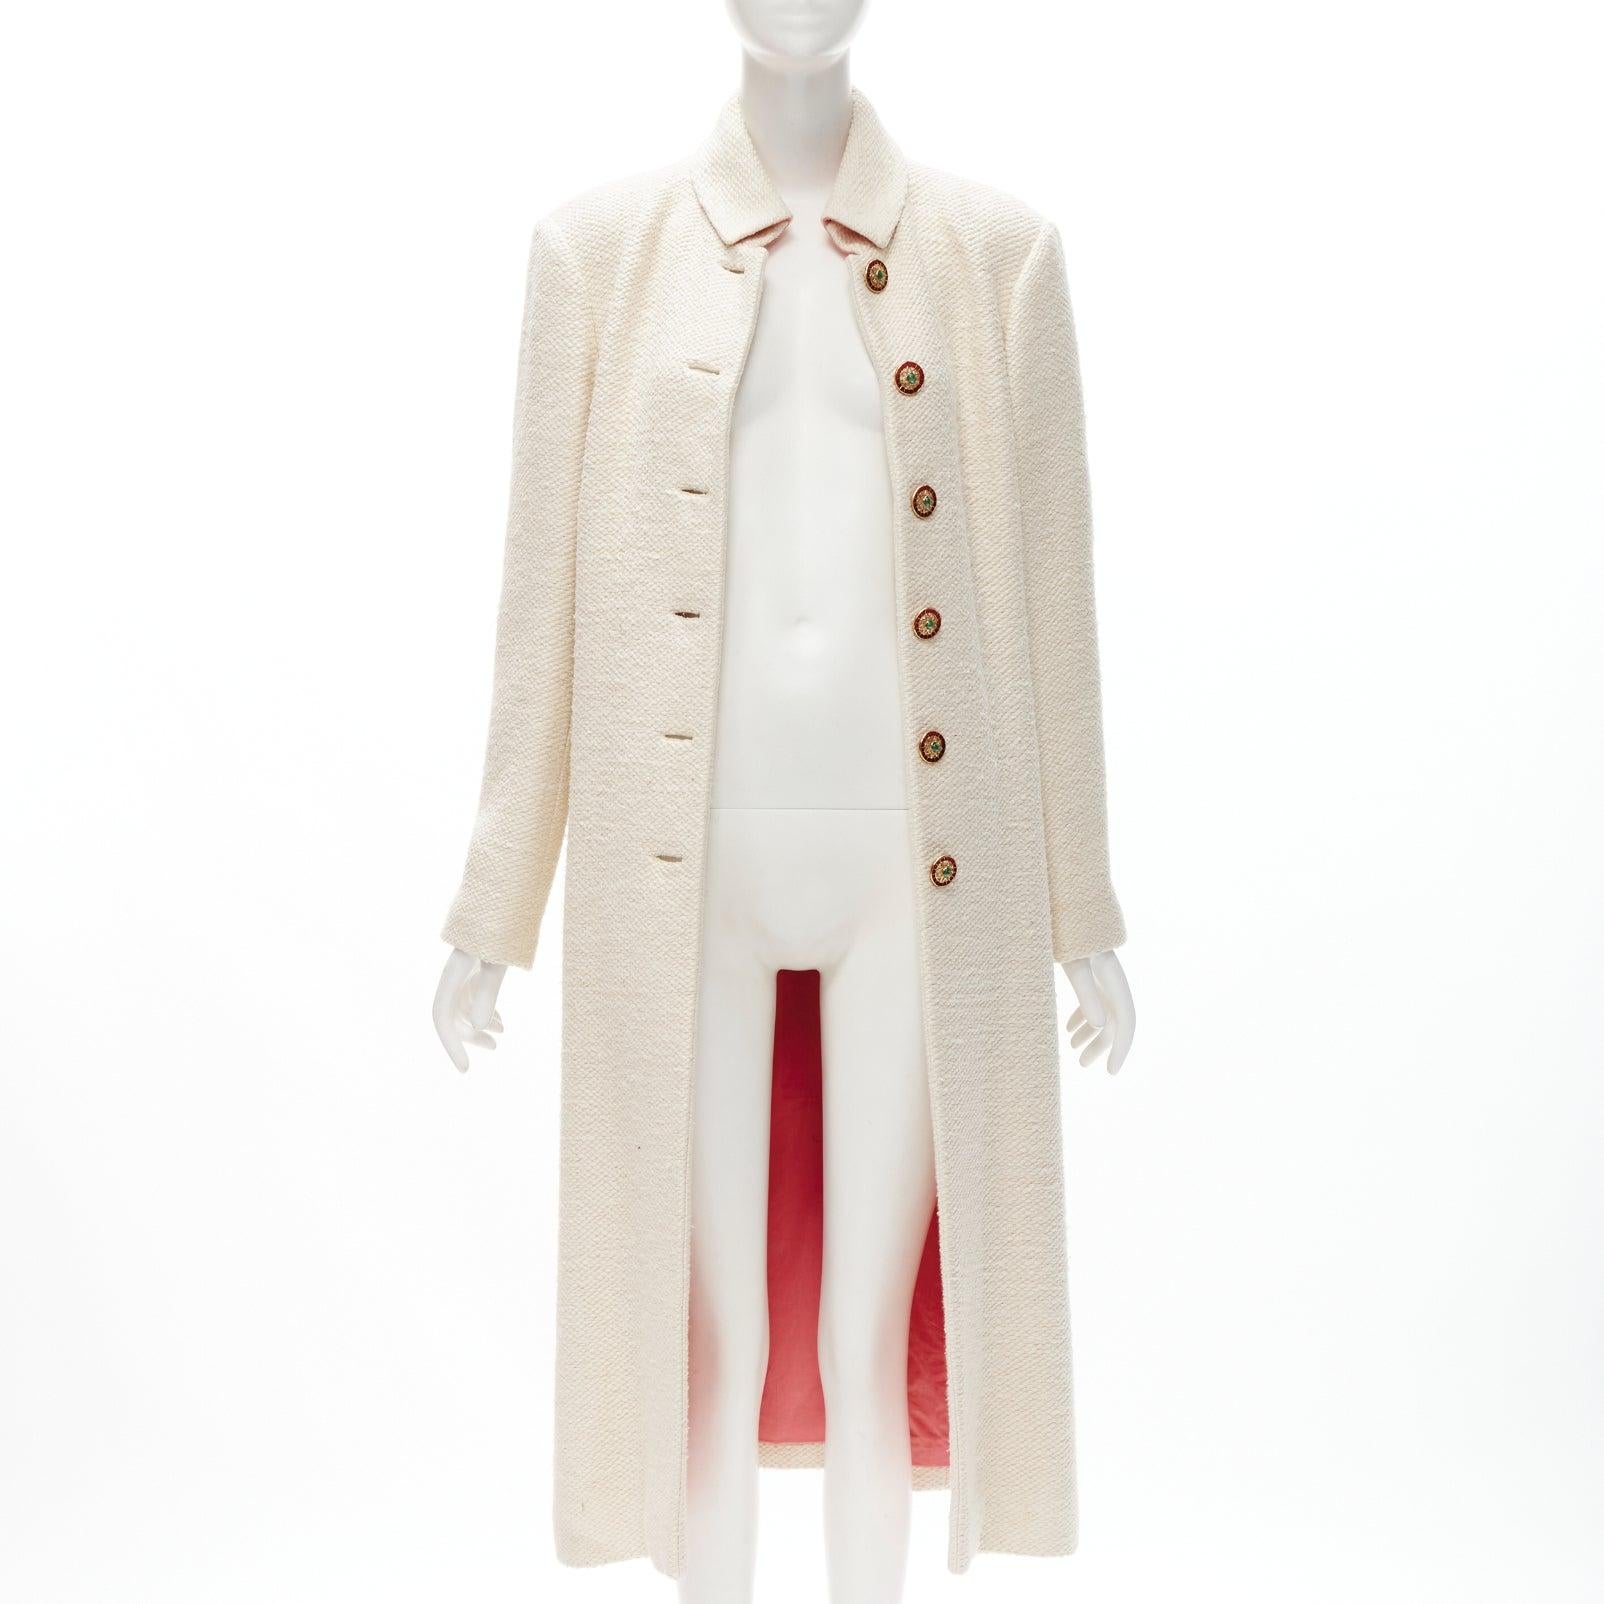 CHANEL 12A Paris Bombay ecru beige wool pink lining enamel button coat L
Reference: BMPA/A00210
Brand: Chanel
Designer: Karl Lagerfeld
Collection: 2012 Paris Bombay - Runway
Material: Feels like wool
Color: Ecru, Pink
Pattern: Solid
Closure: